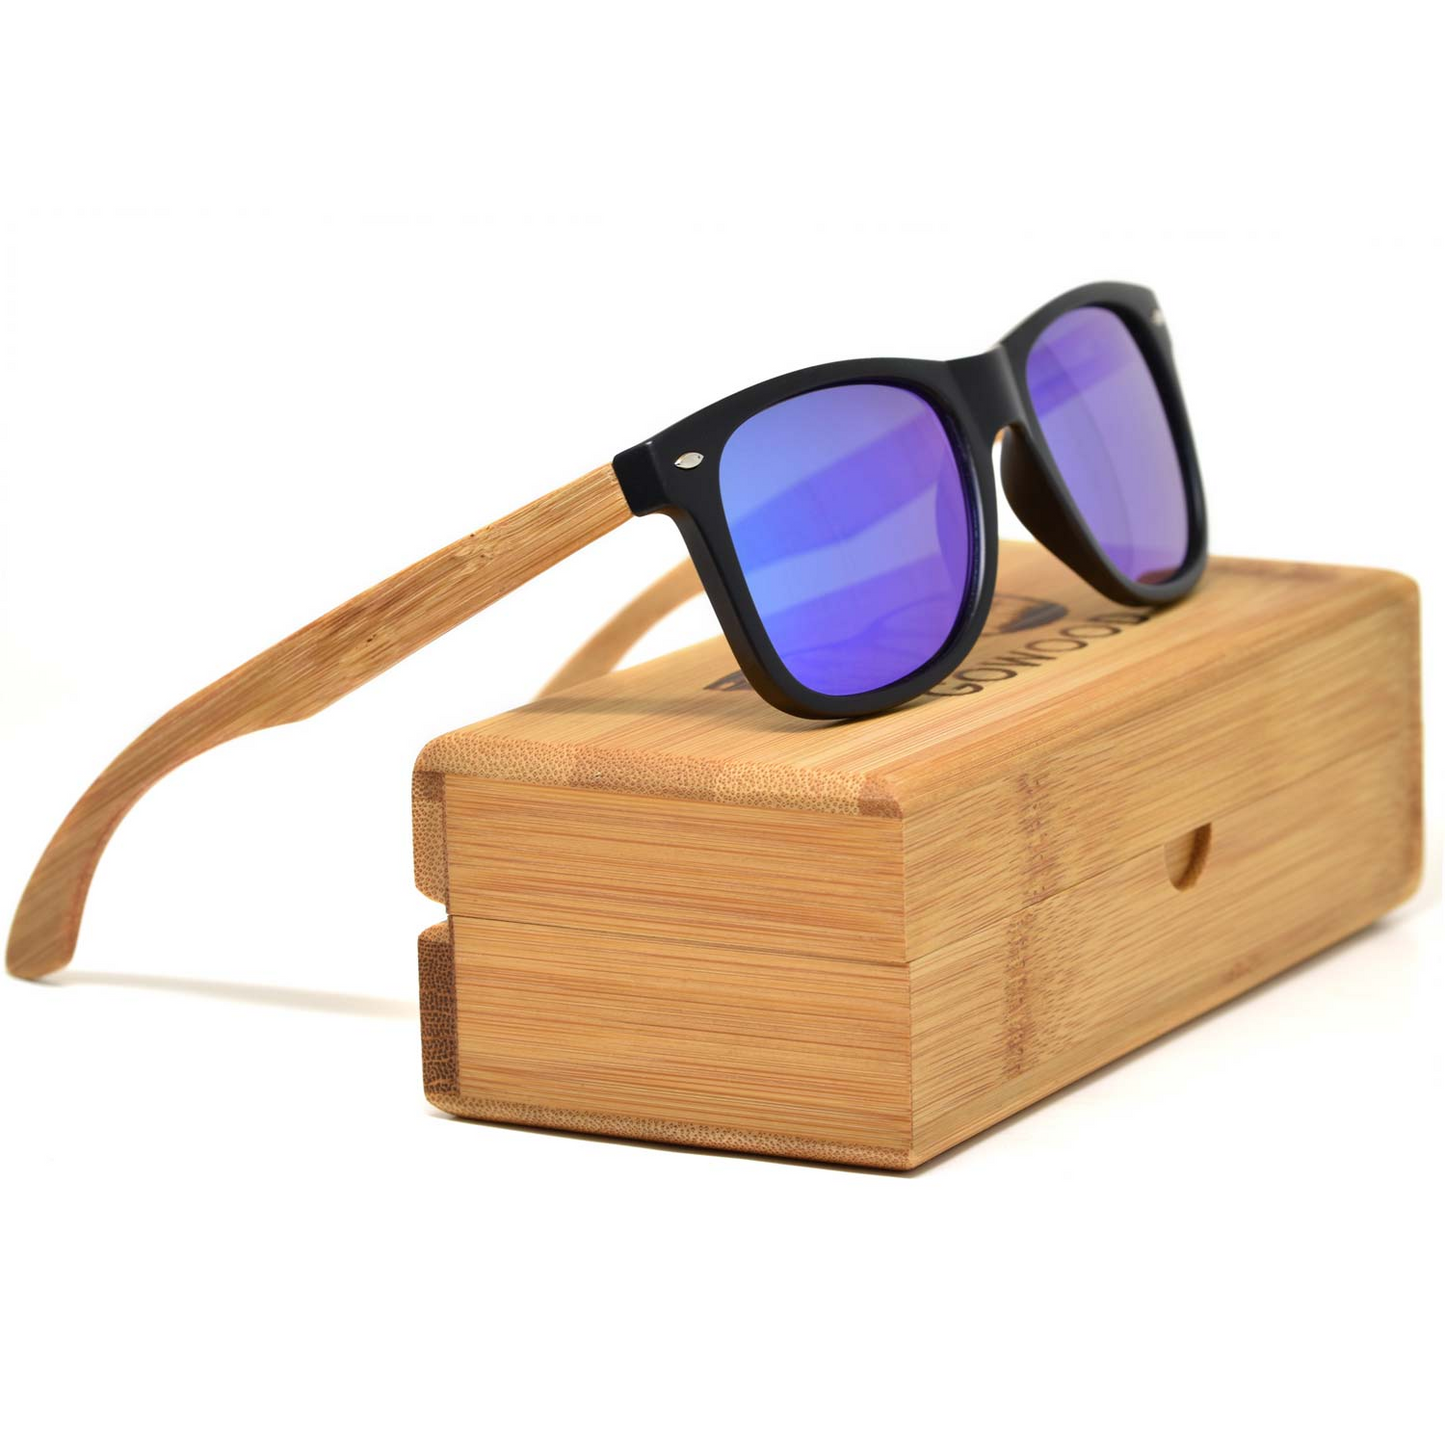 Bamboo wood classic style sunglasses with blue mirrored polarized lenses